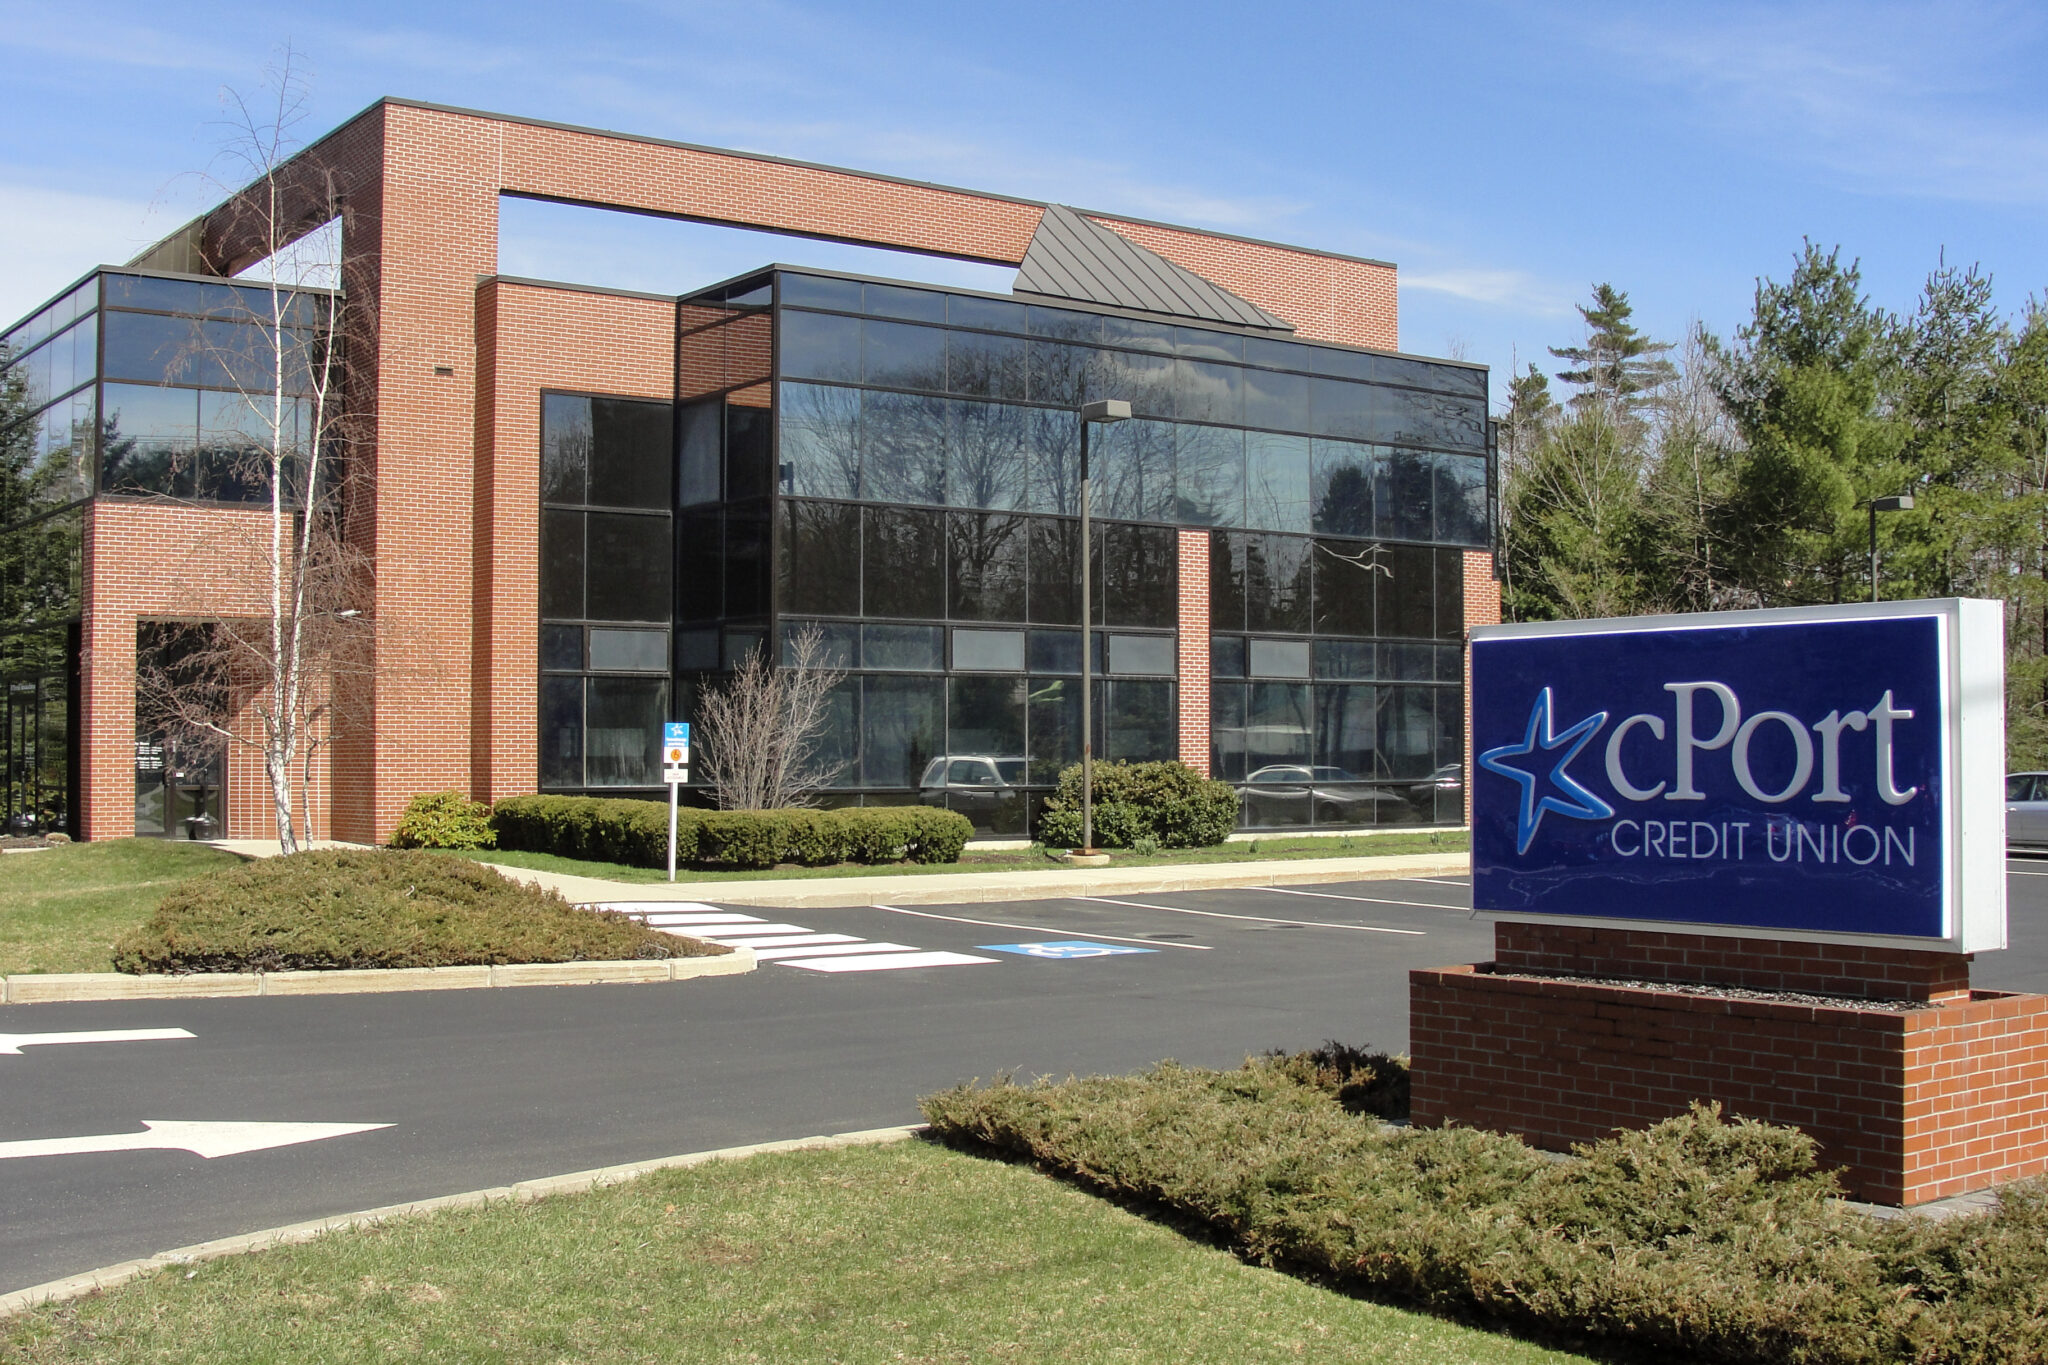 Photo of cPort Credit Union in Portland. This is our Riverside branch and main office location.